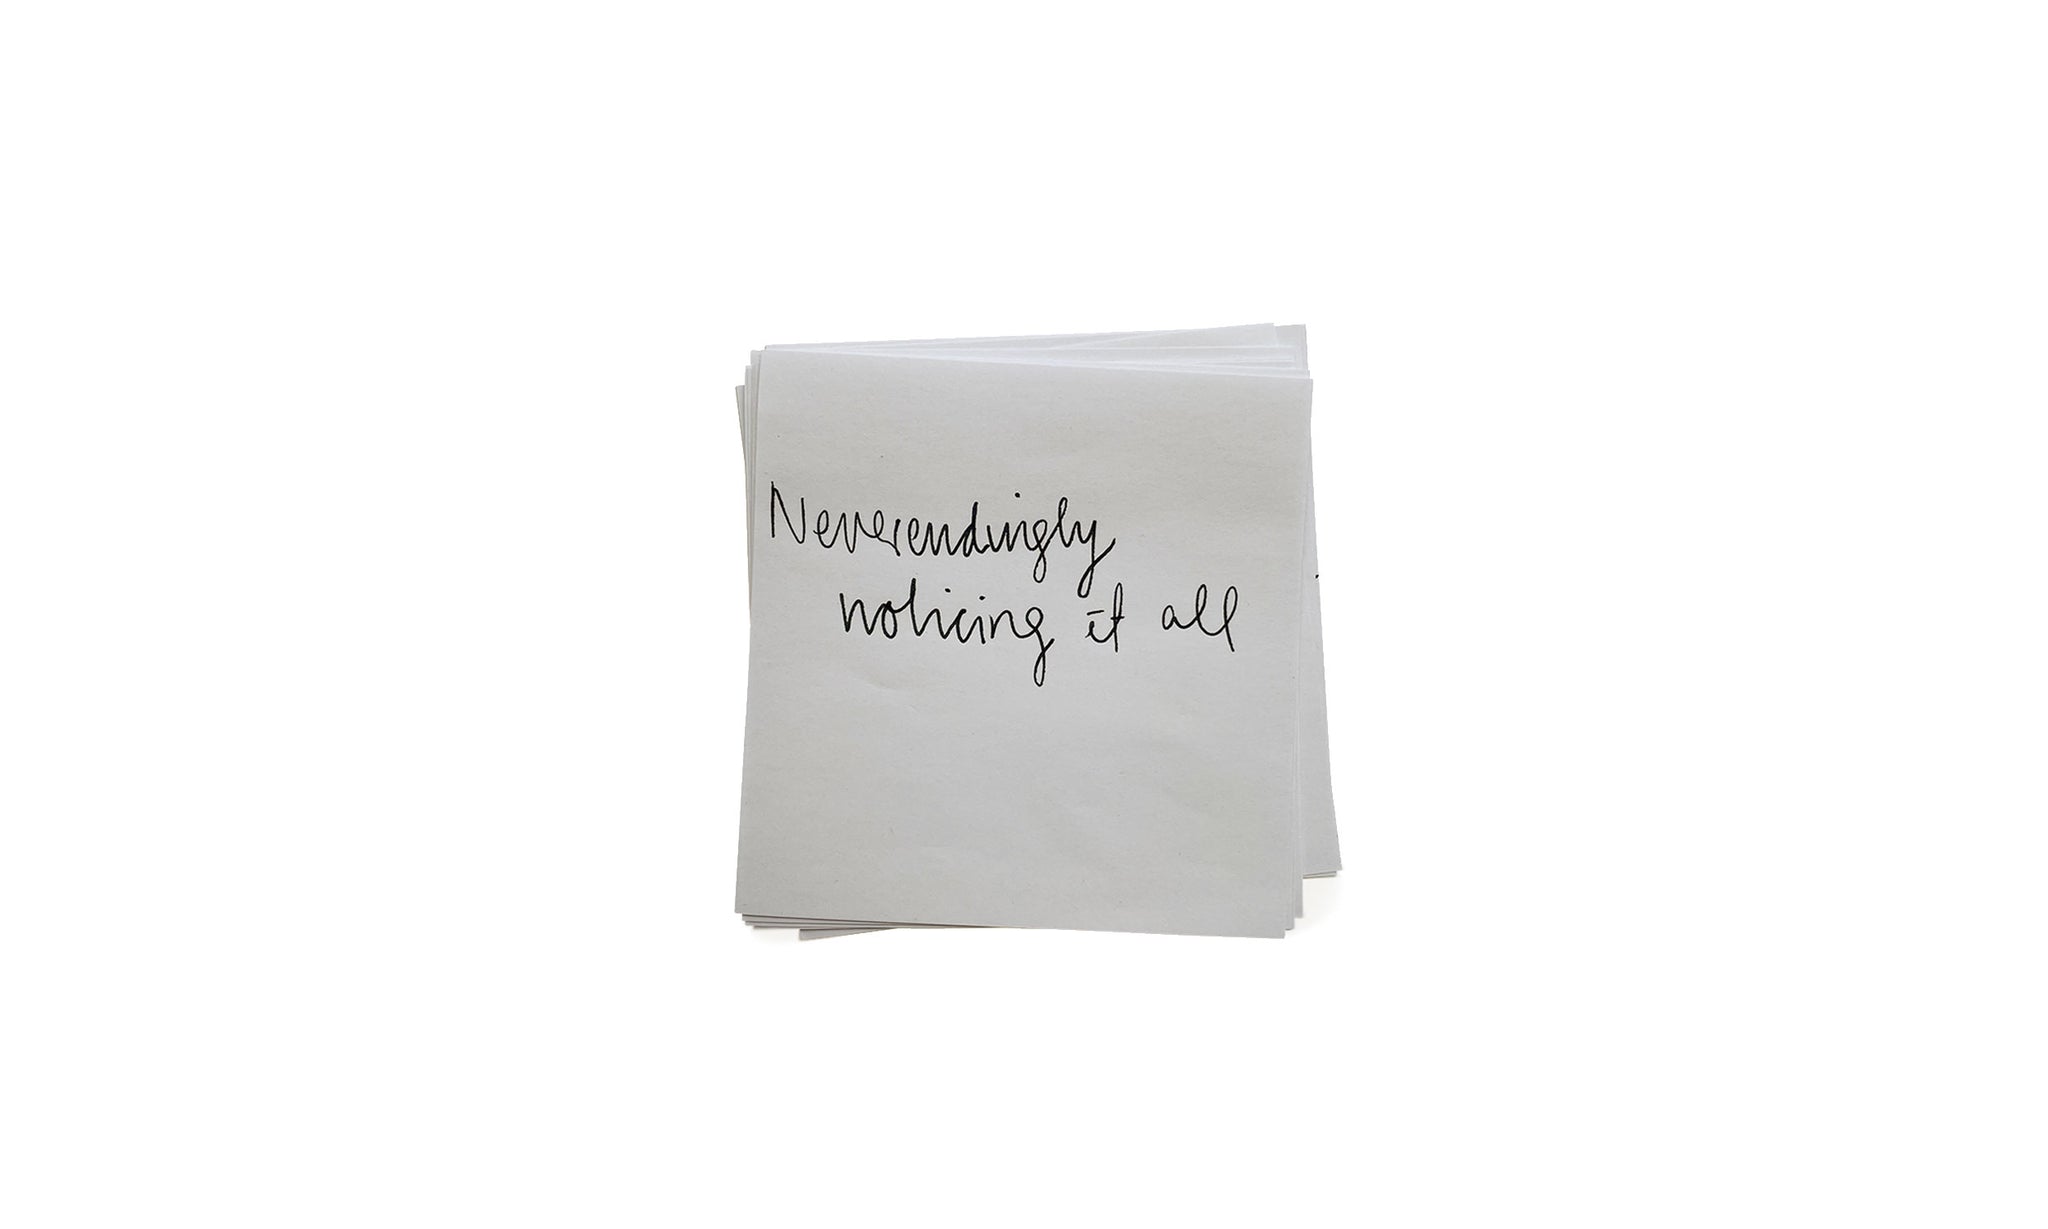 Handwritten note saying Neverendingly noticing at all